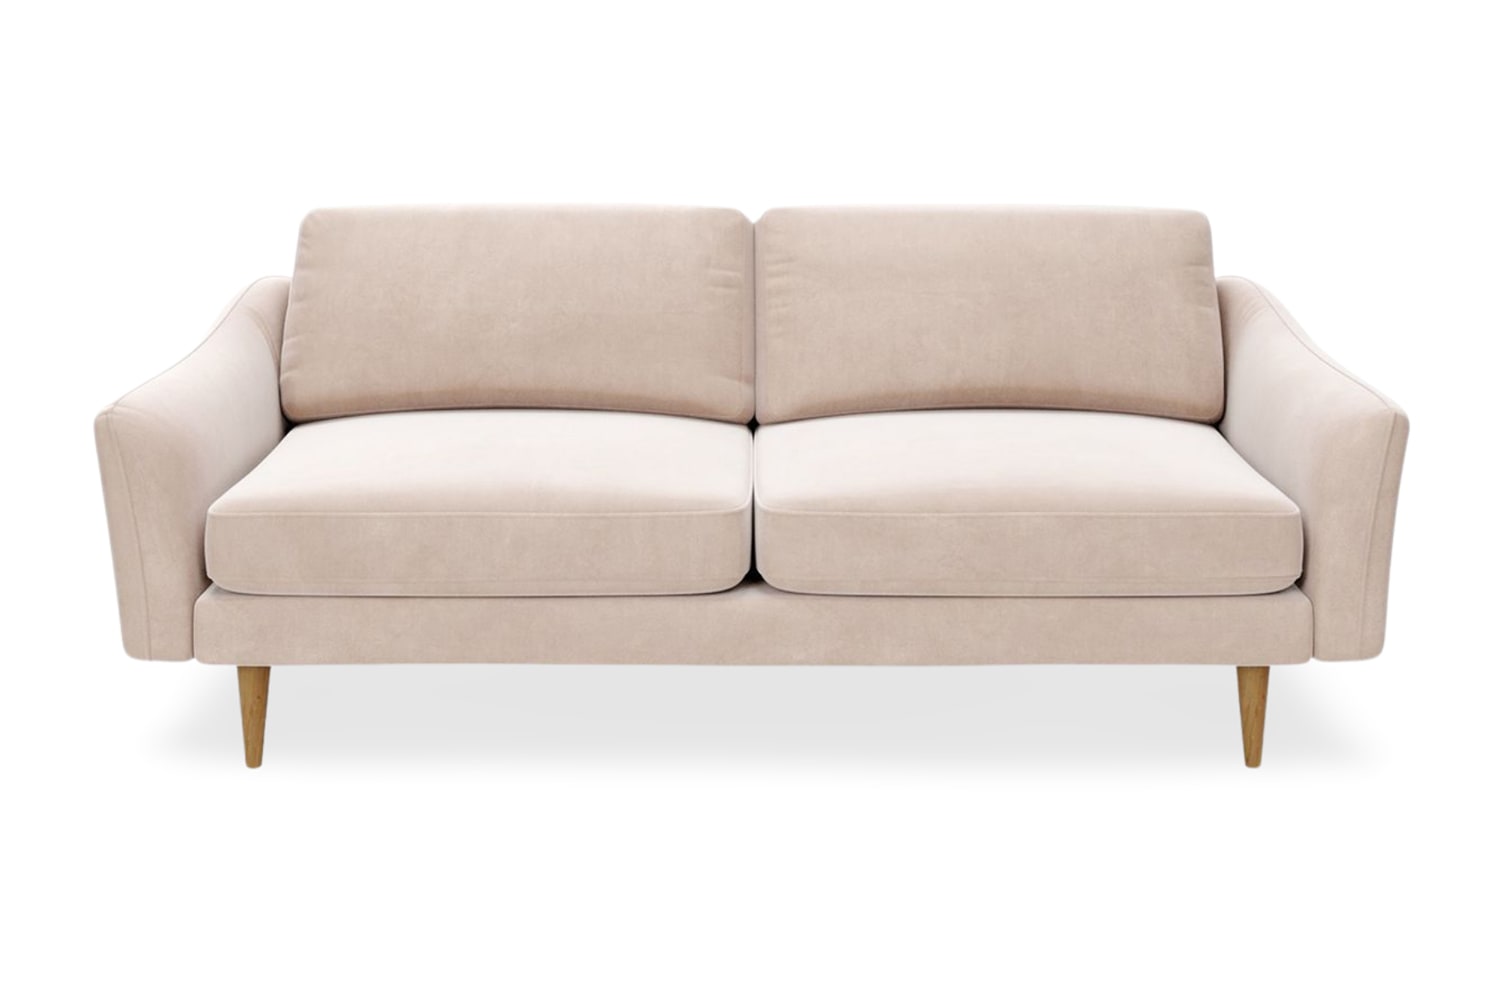 SNUG | The Rebel 3 Seater Sofa in Taupe variant_40414890590256